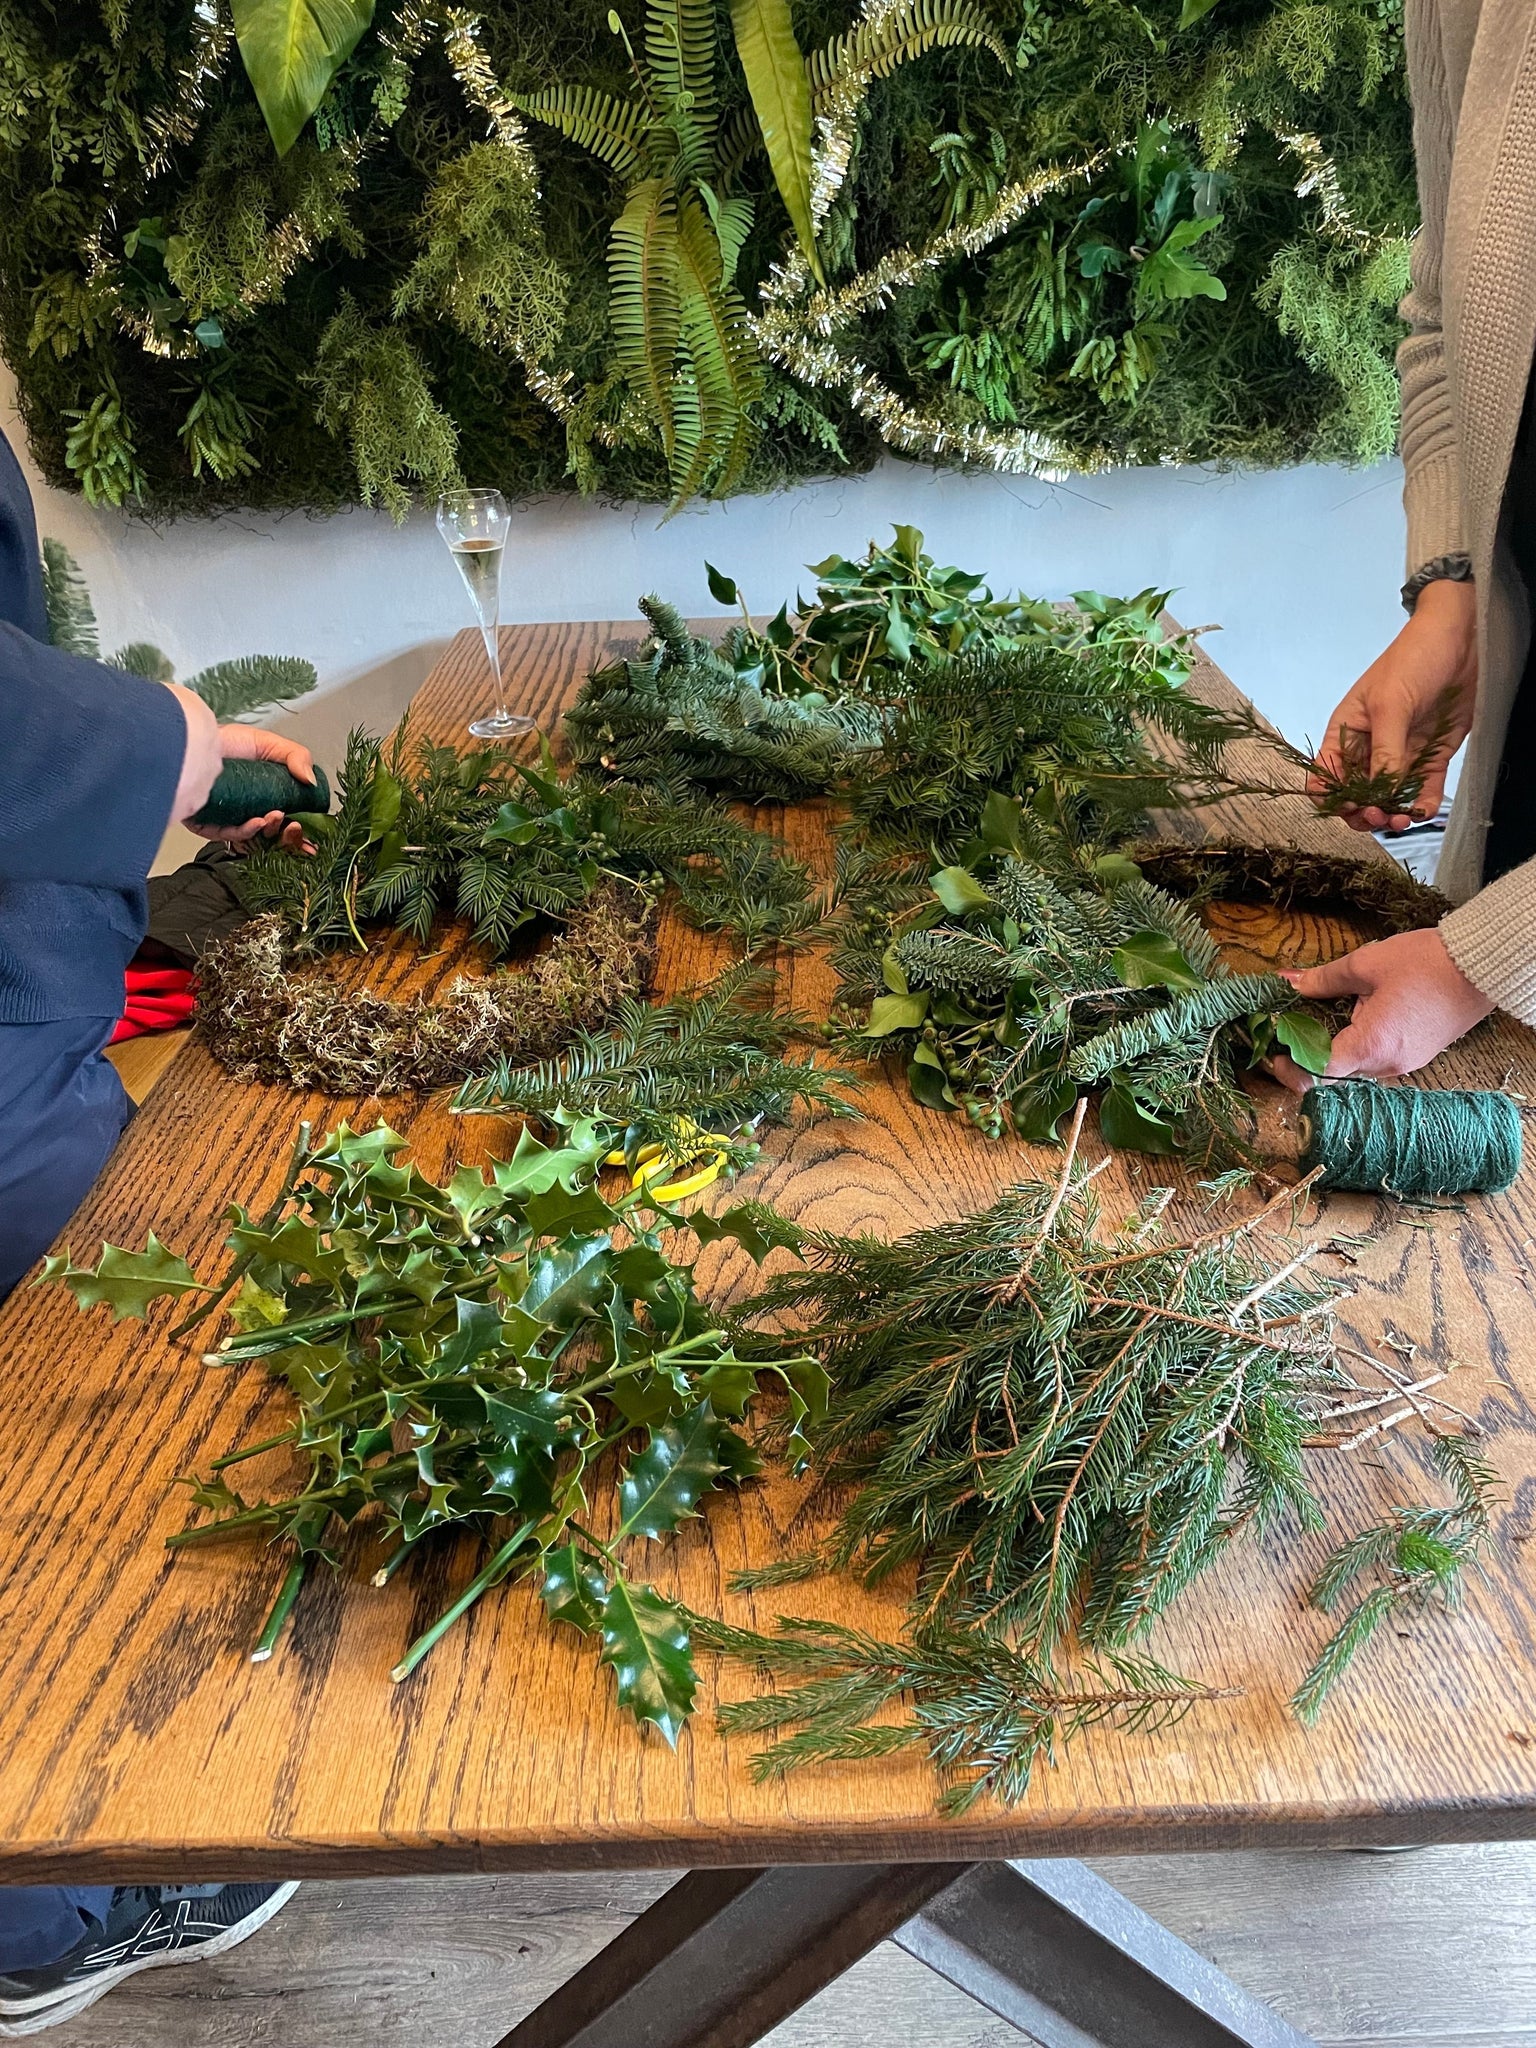 Christmas Wreath Workshop – Sunday 26th November, Starting @ 11am (£75 per person) 2.5 hours